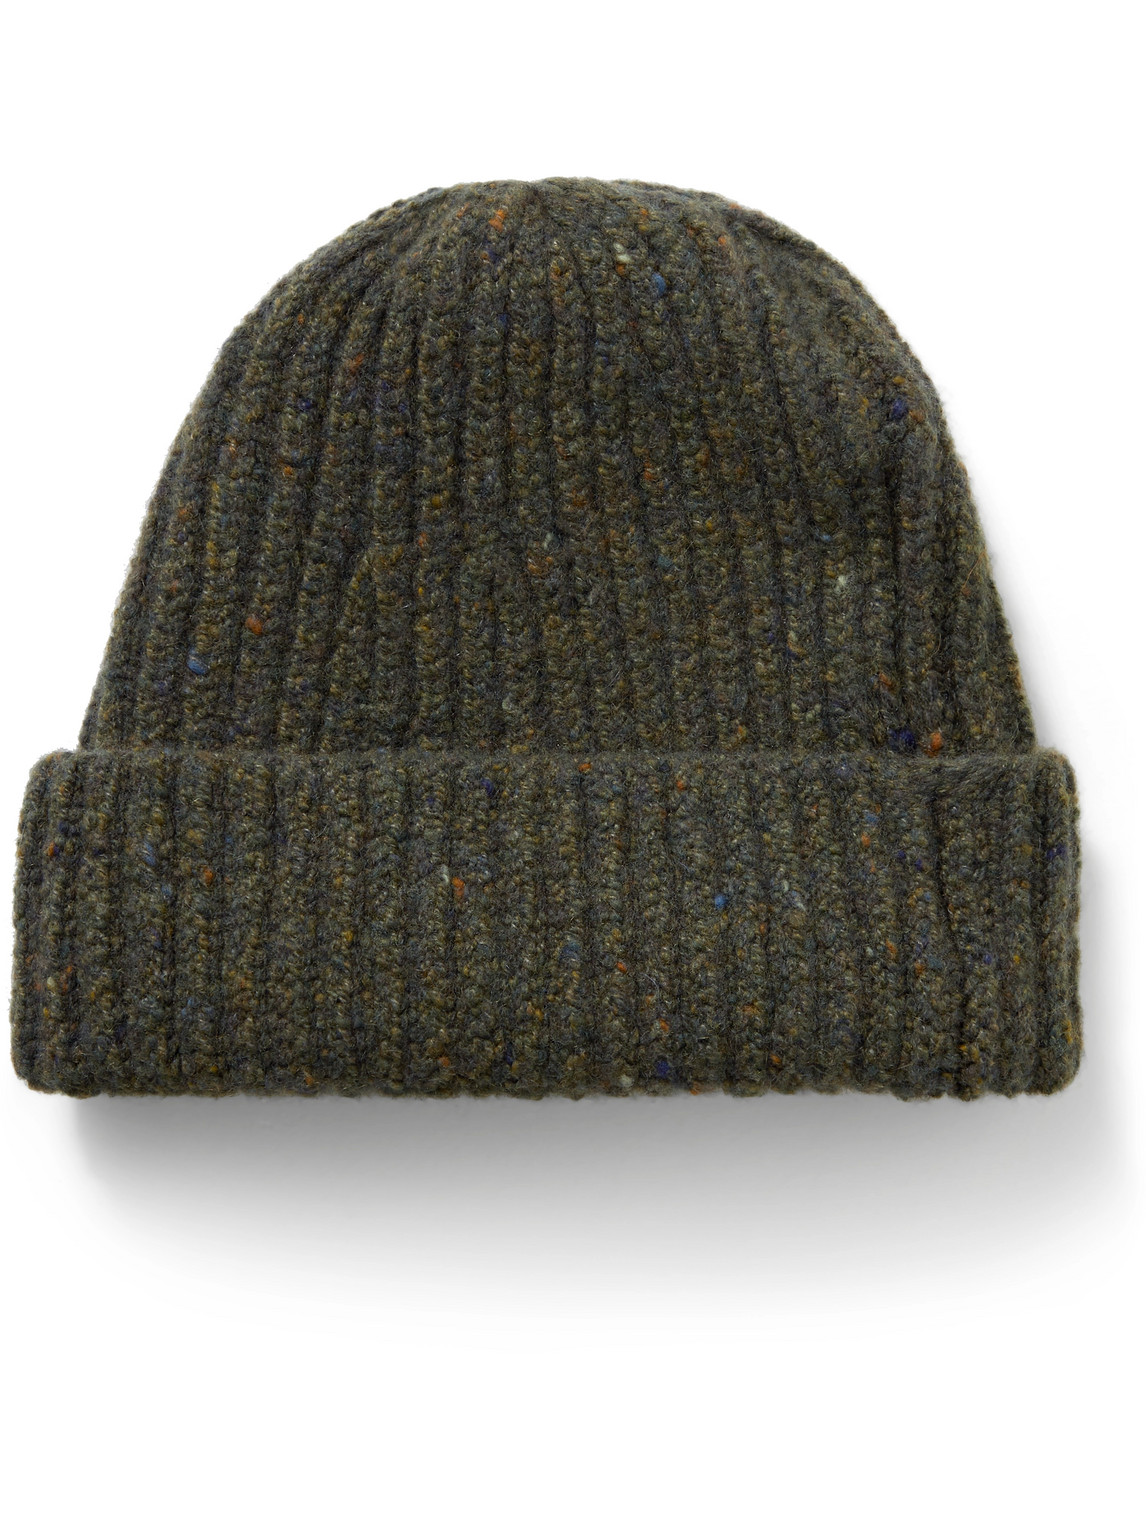 Inis Meáin - Ribbed Merino Wool and Cashmere-Blend Beanie - Men - Green von Inis Meáin